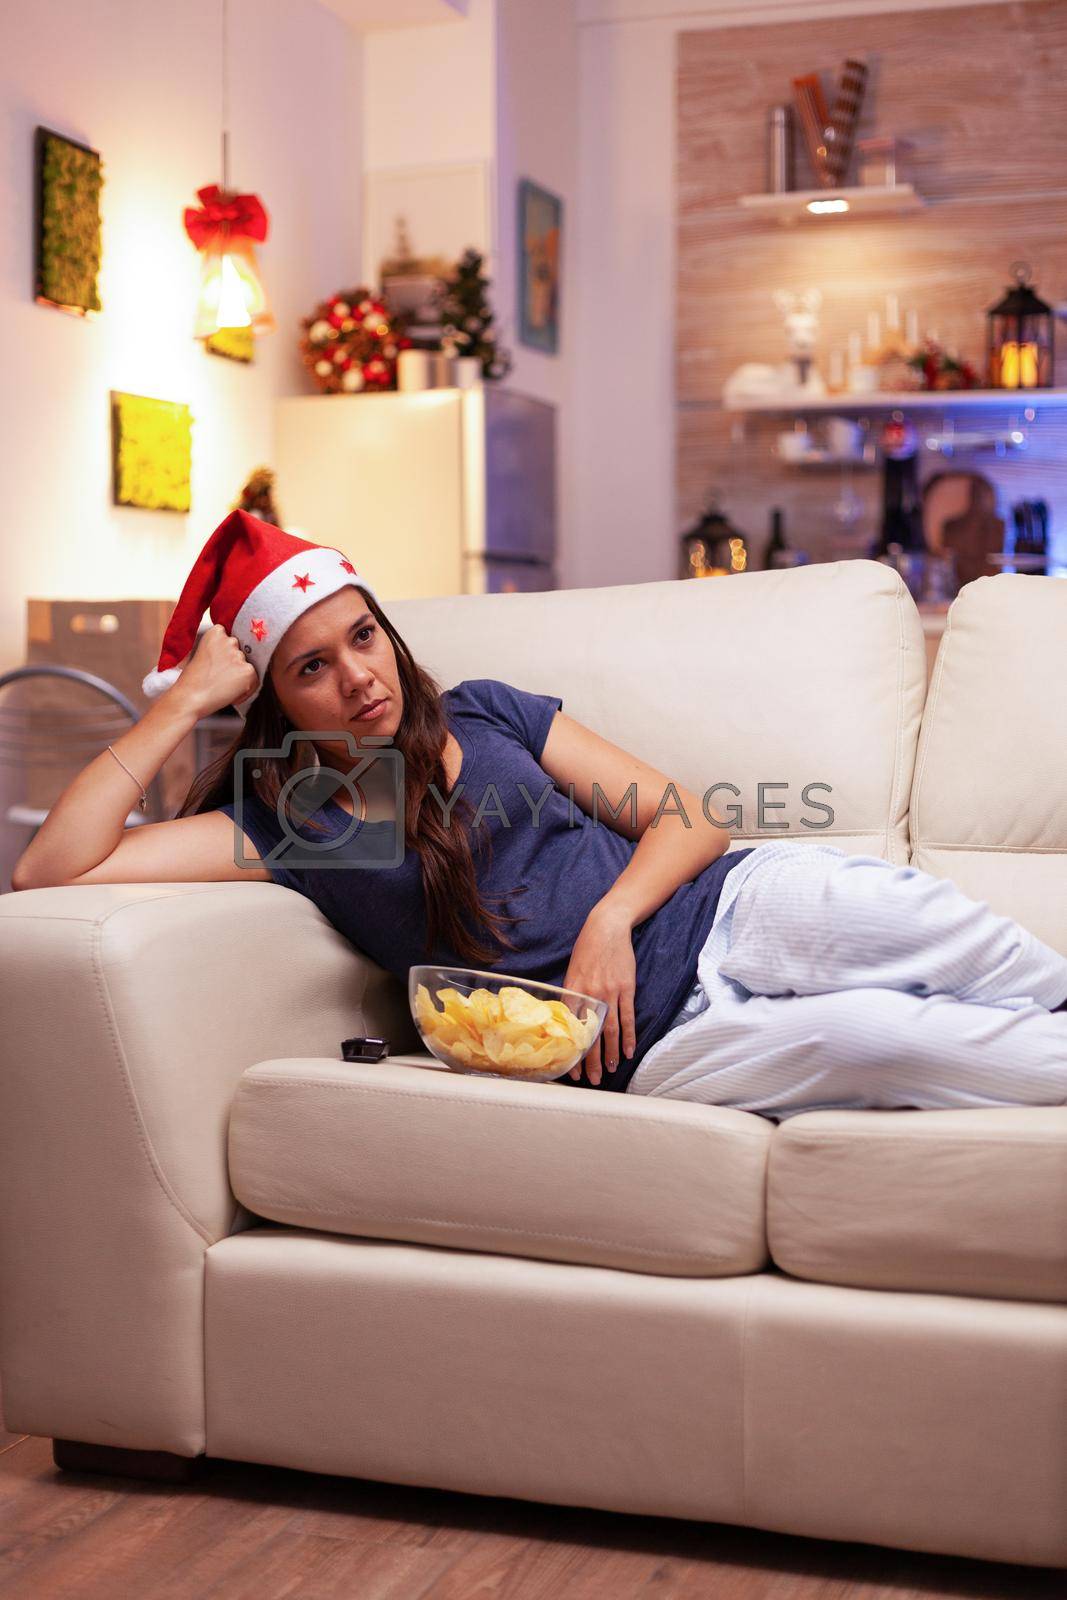 Royalty free image of Woman lying on sofa watching xmas movie on television during christmastime by DCStudio